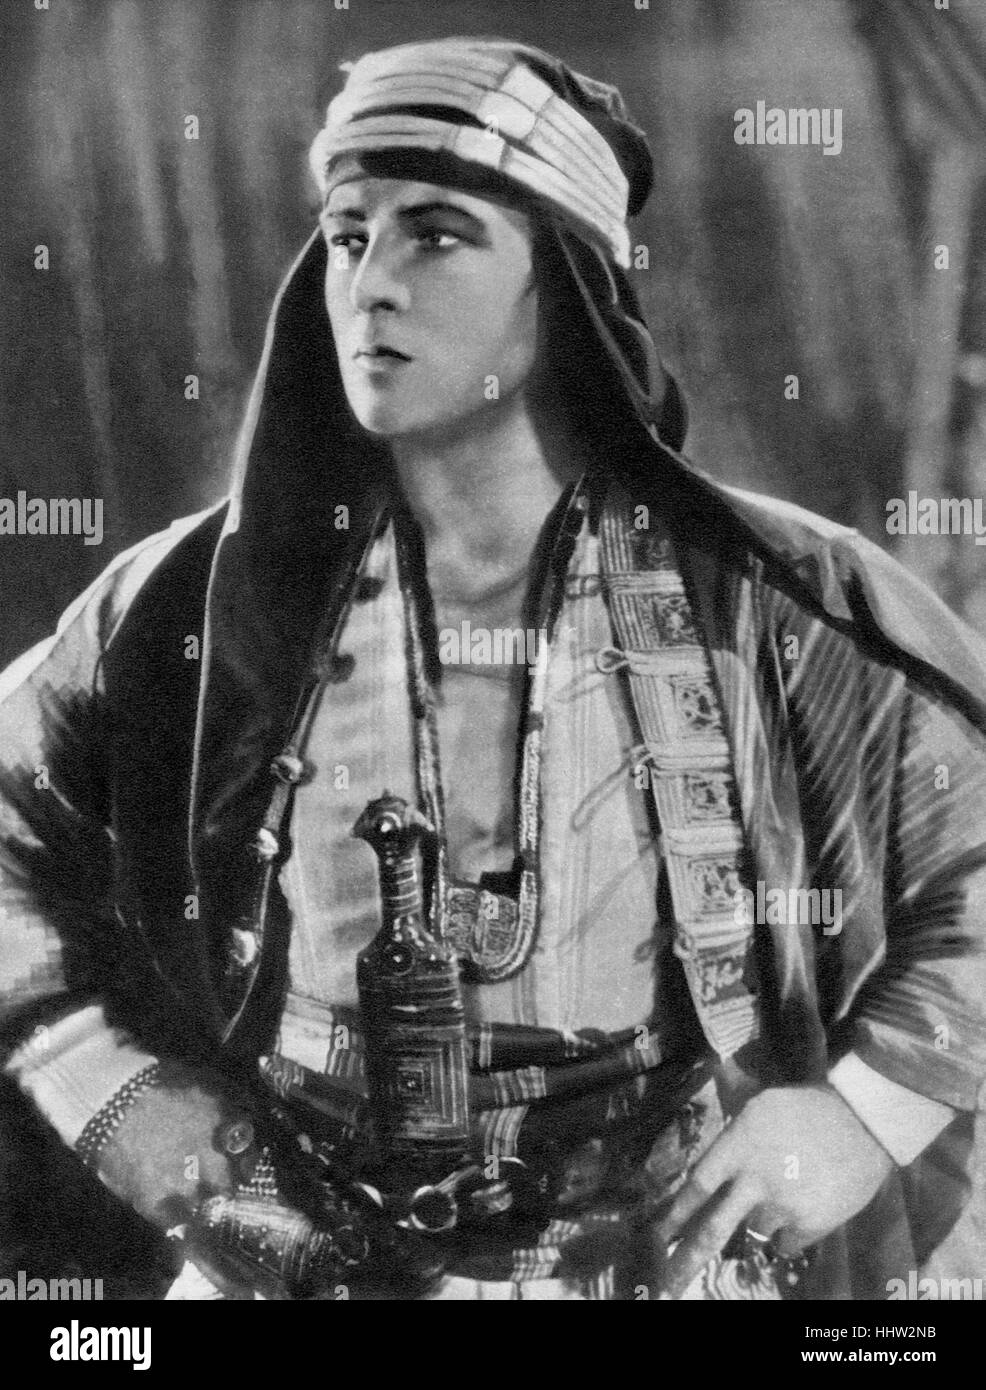 Rudolph Valentino (May 6, 1895 – August 23, 1926), Italian born American actor in silent films. 1926 portrait in the role of The Sheik, 1921 silent film Stock Photo